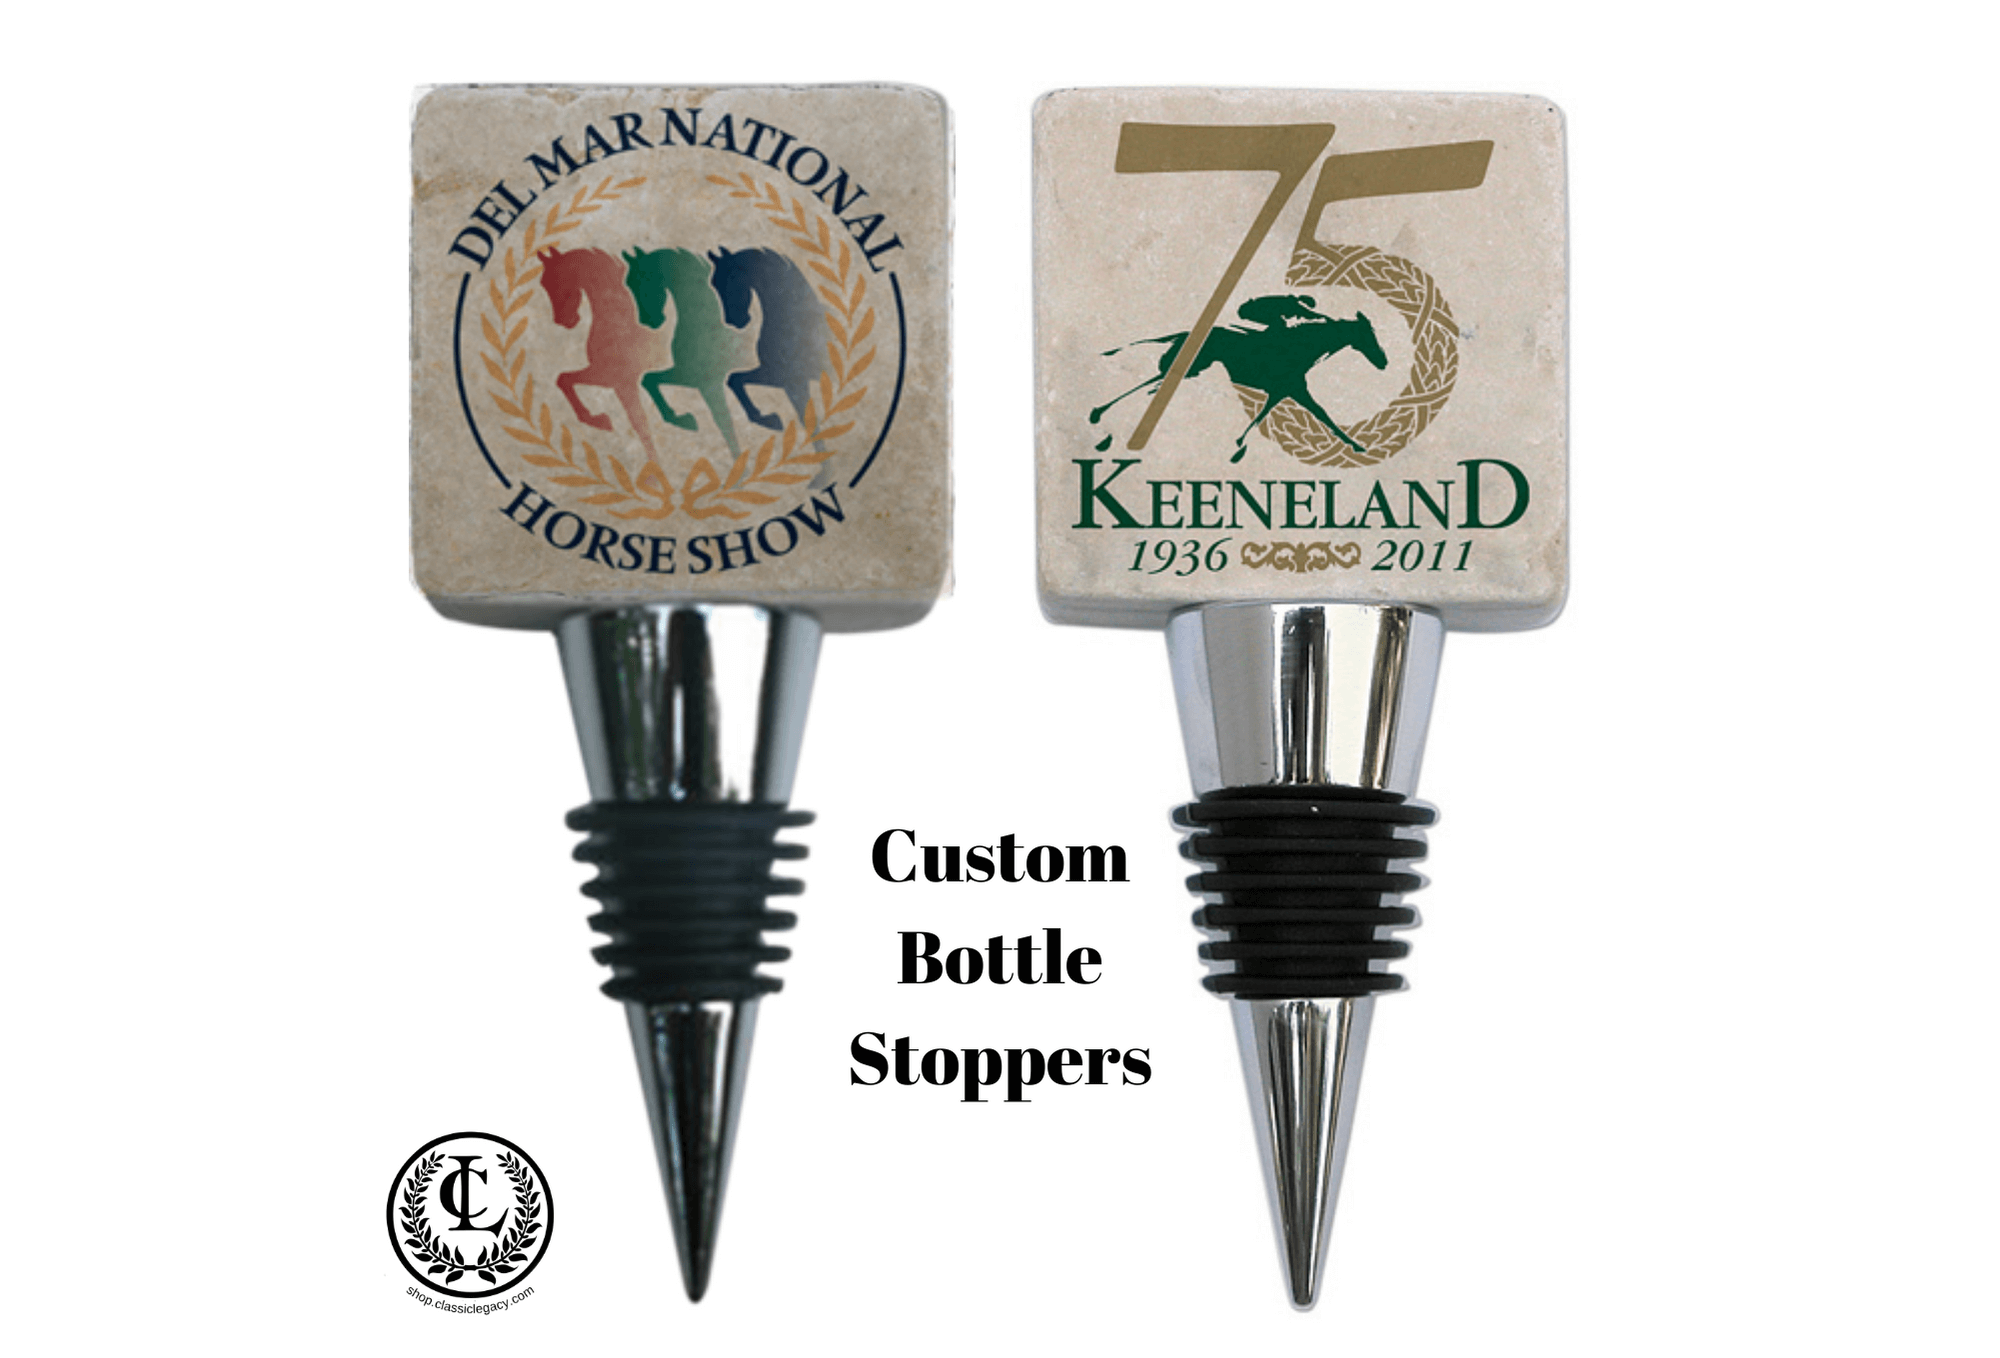 Custom marble bottle stopper with custom logo of equestrian events and horse racing events.